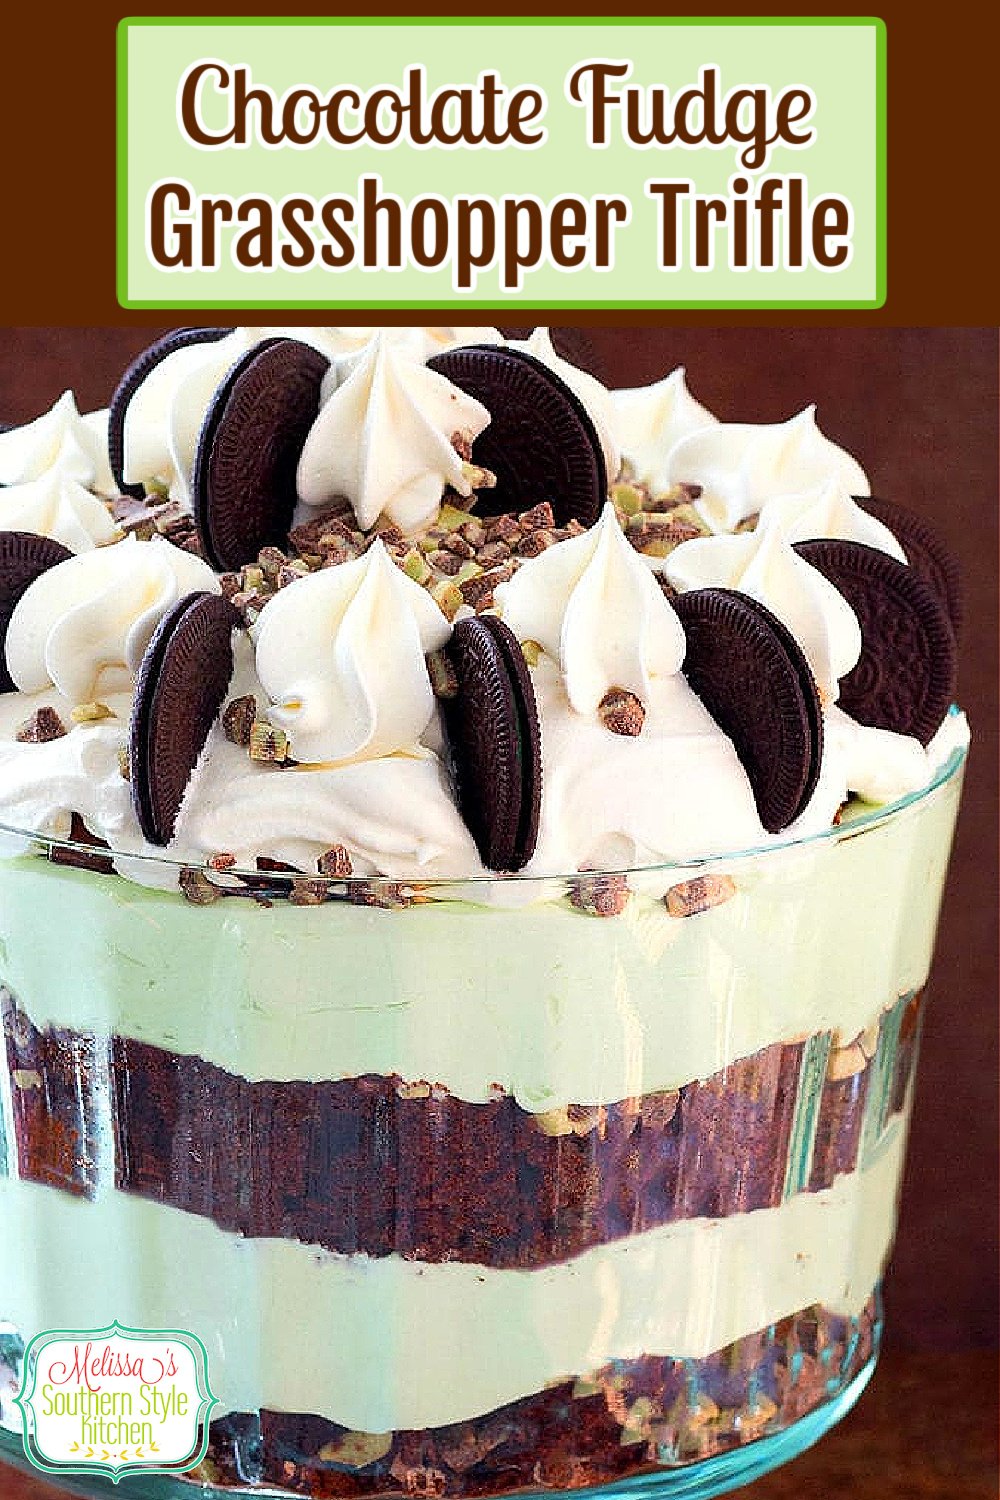 This stunning Chocolate Fudge Grasshopper Trifle is guaranteed to be the star of your holiday desserts menu #chocolatetrifle #grasshoppertrifle #chocolatemint #mint #triflerecipes #christmasdesserts #mintchocolate #dessertfood #stpatricksdesserts #dessert #holidayrecipes #southernfood #southernrecipes